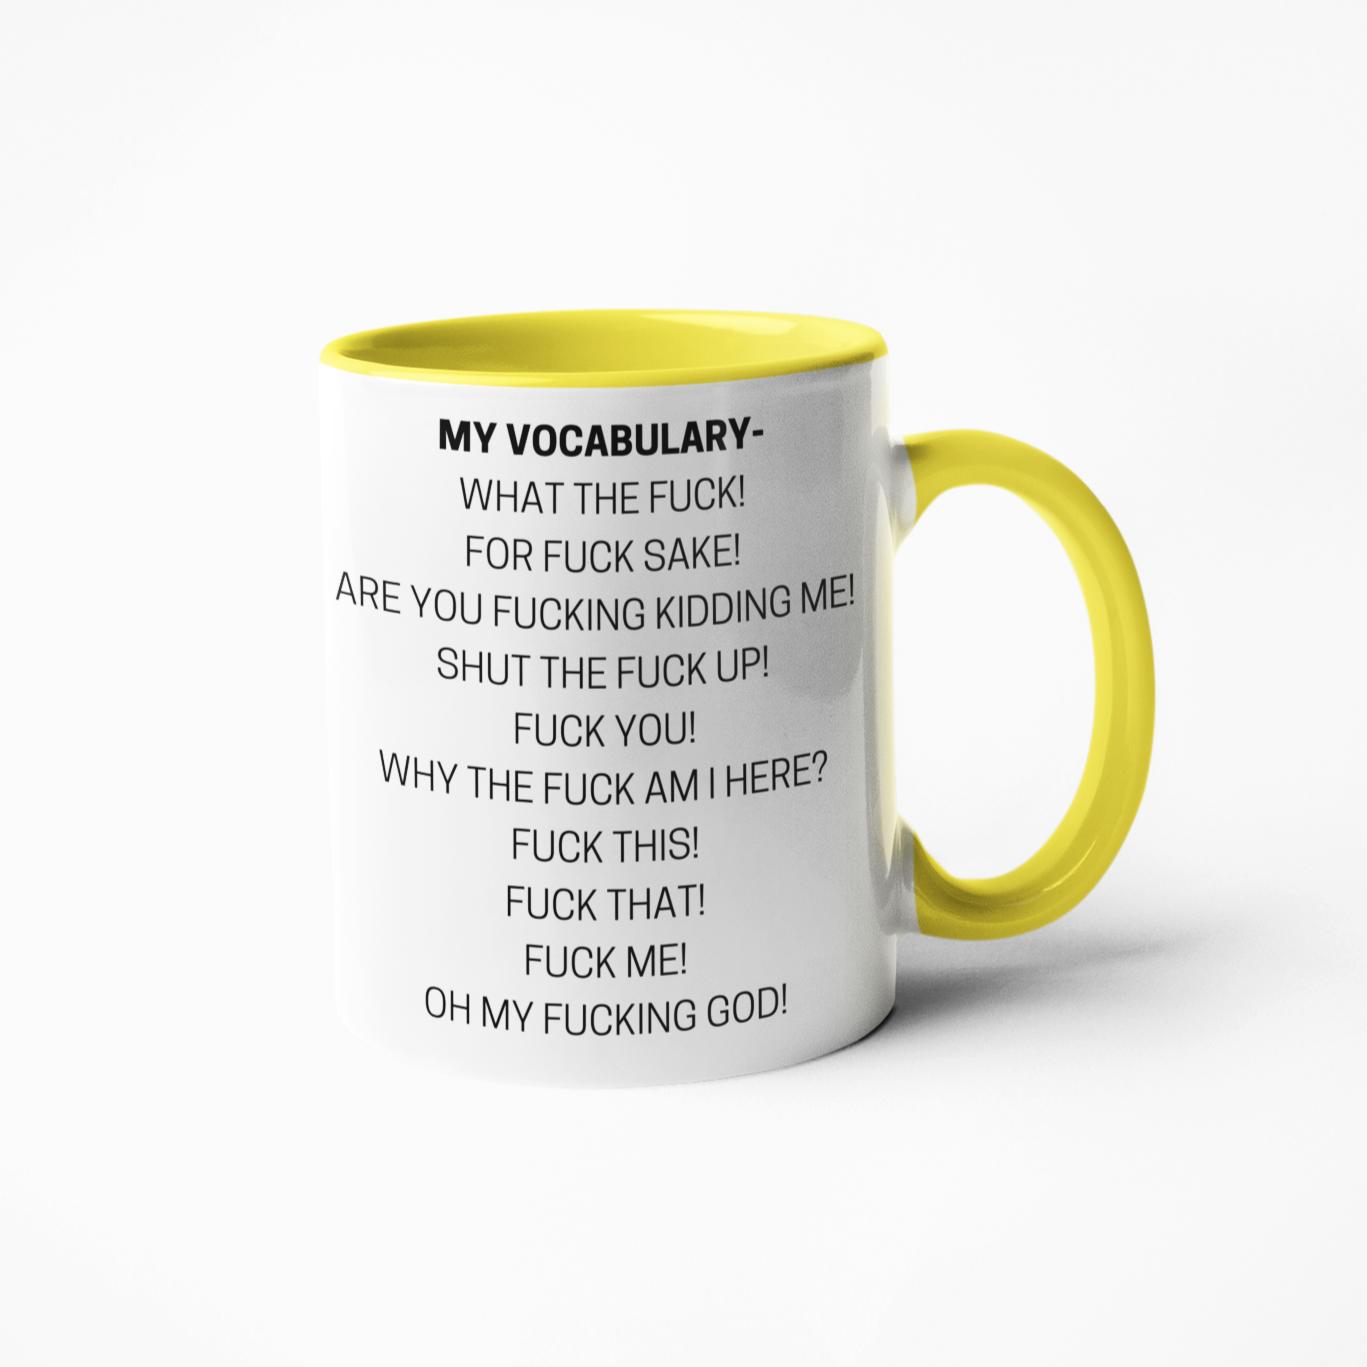 This My Swear Vocabulary Rude Sweary Funny Coffee Mug makes the perfect gift for any coffee lover. It is made of durable ceramic, ensuring a long-lasting life. The bold design and statement of "My Swear Vocabulary" is sure to be a conversation starter at any gathering. Enjoy your favourite beverage in this unique and humorous mug!